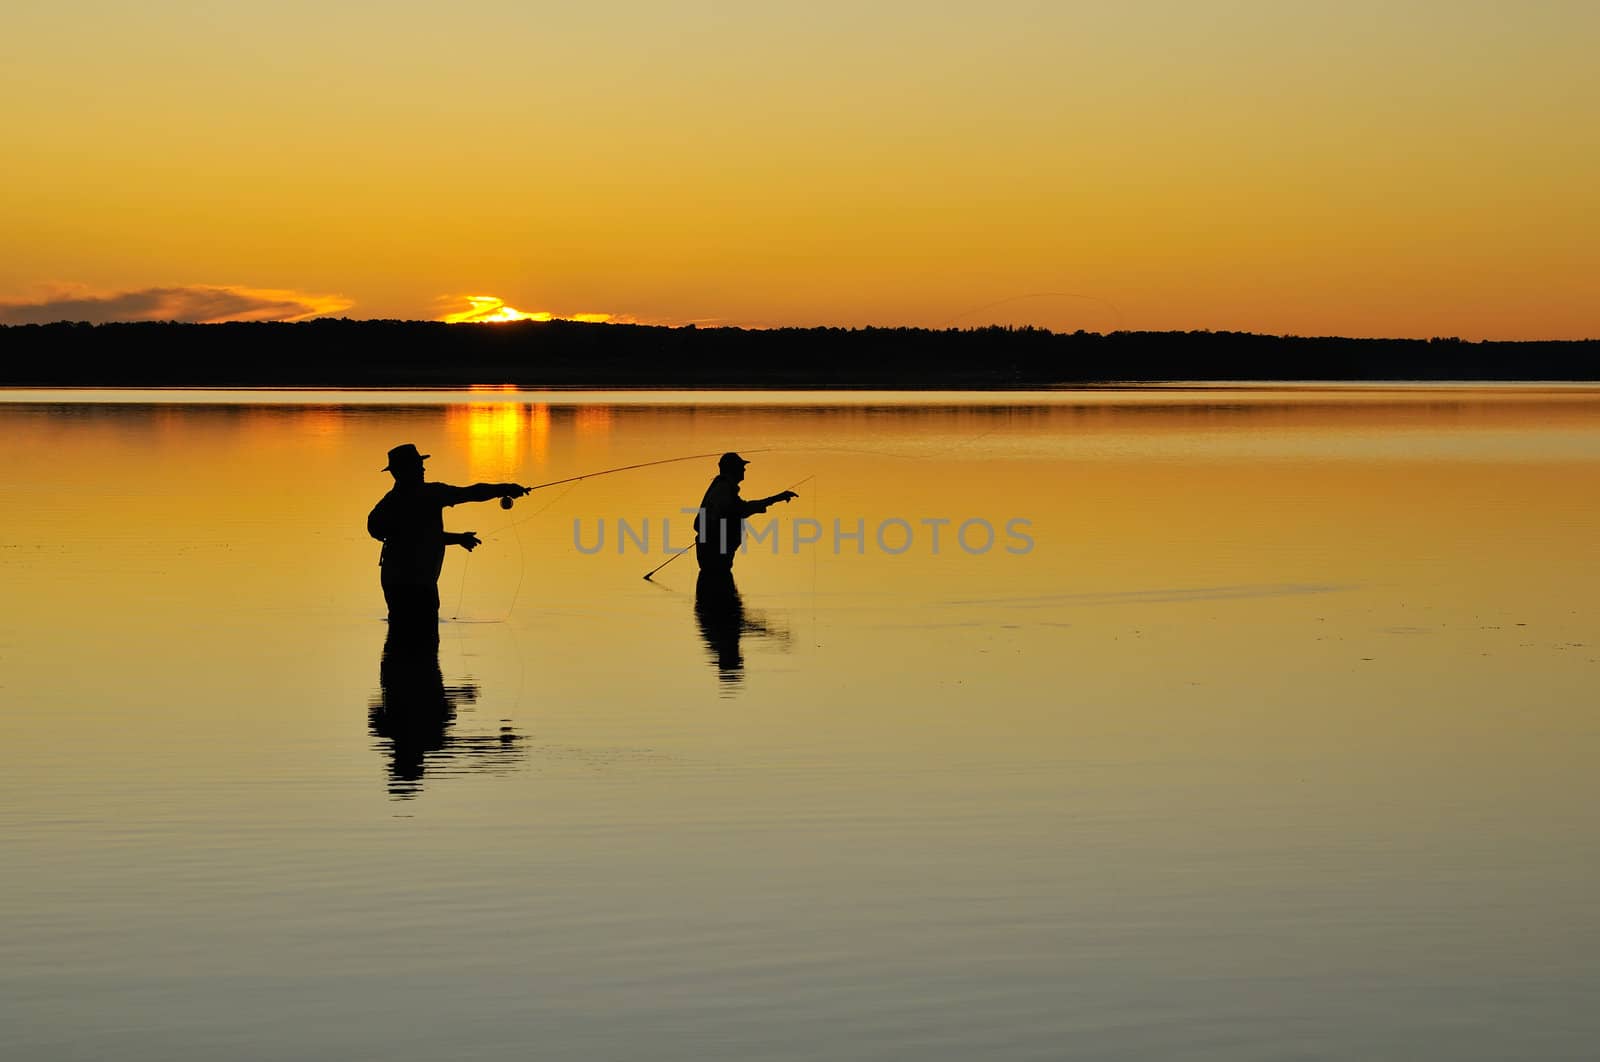 Fishermen silhouettes at dusk fishing in a lake